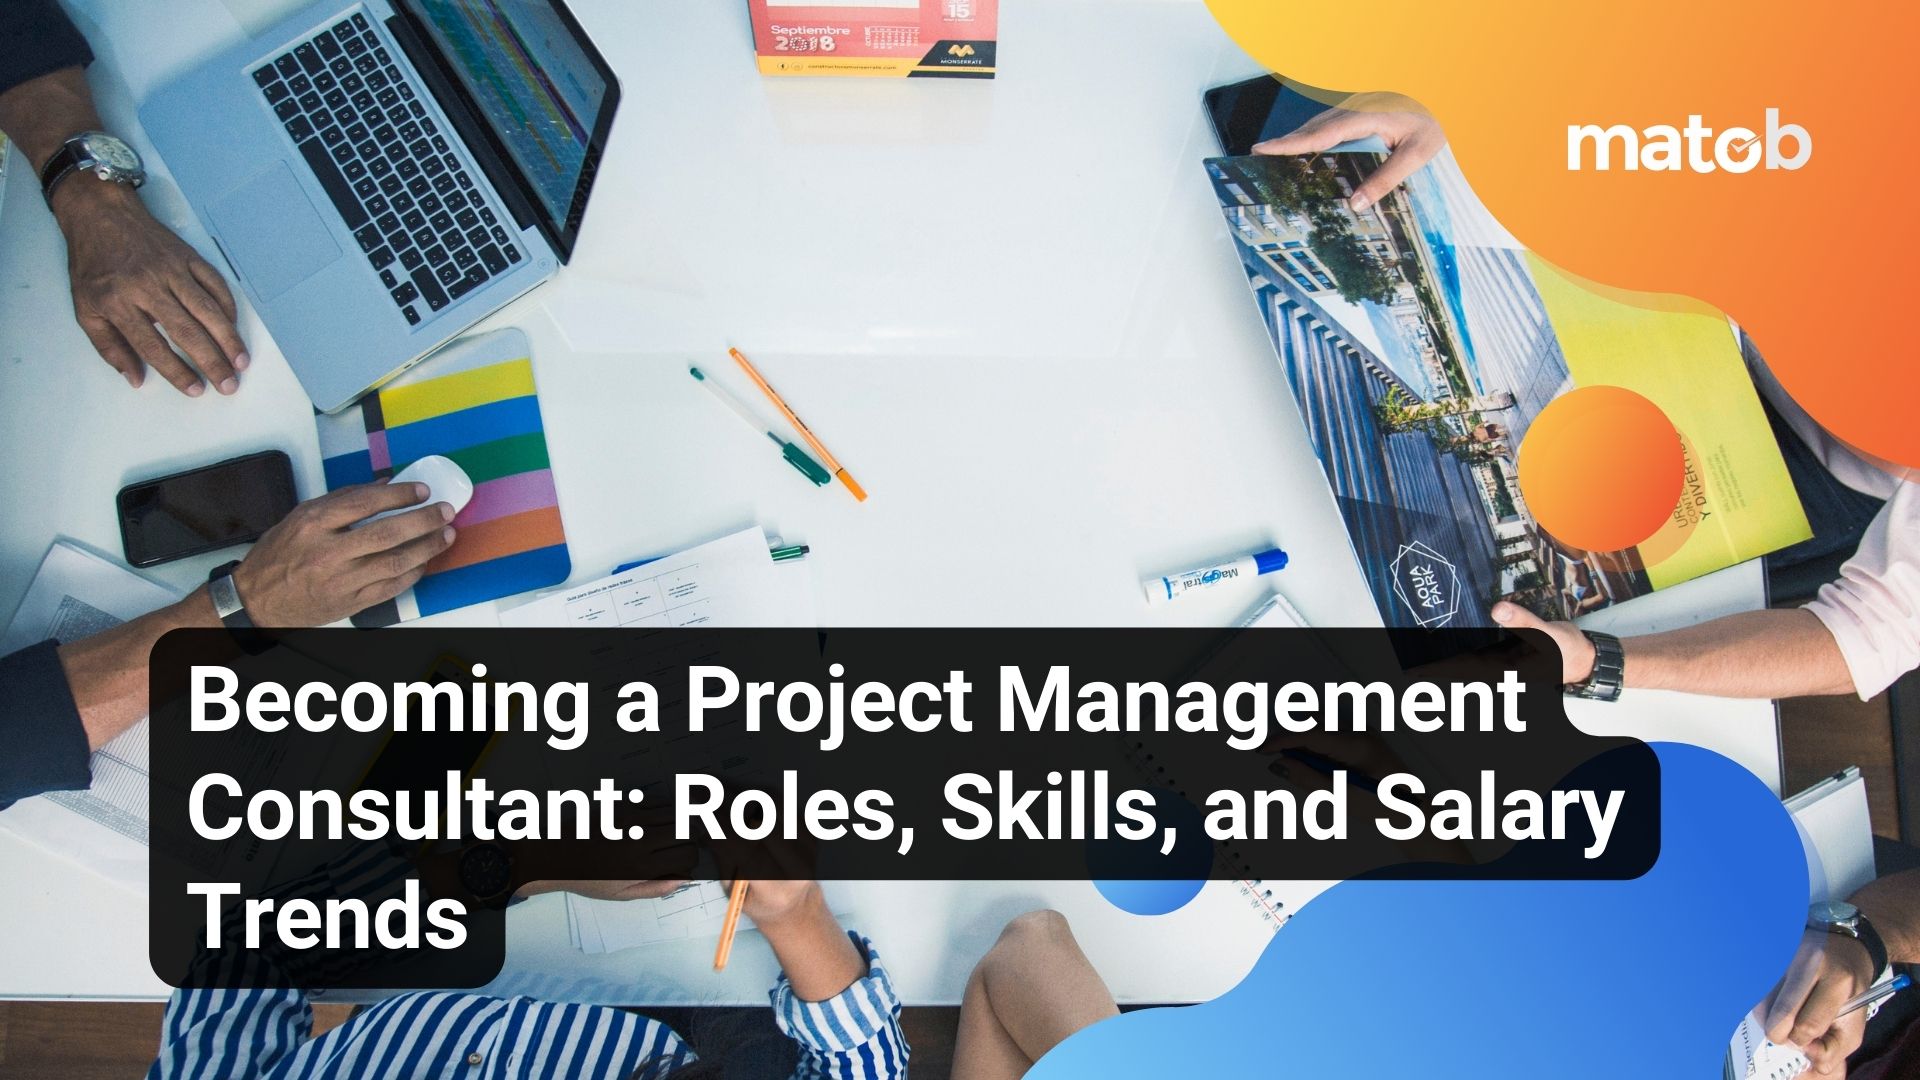 Becoming a Project Management Consultant: Roles, Skills, and Salary Trends